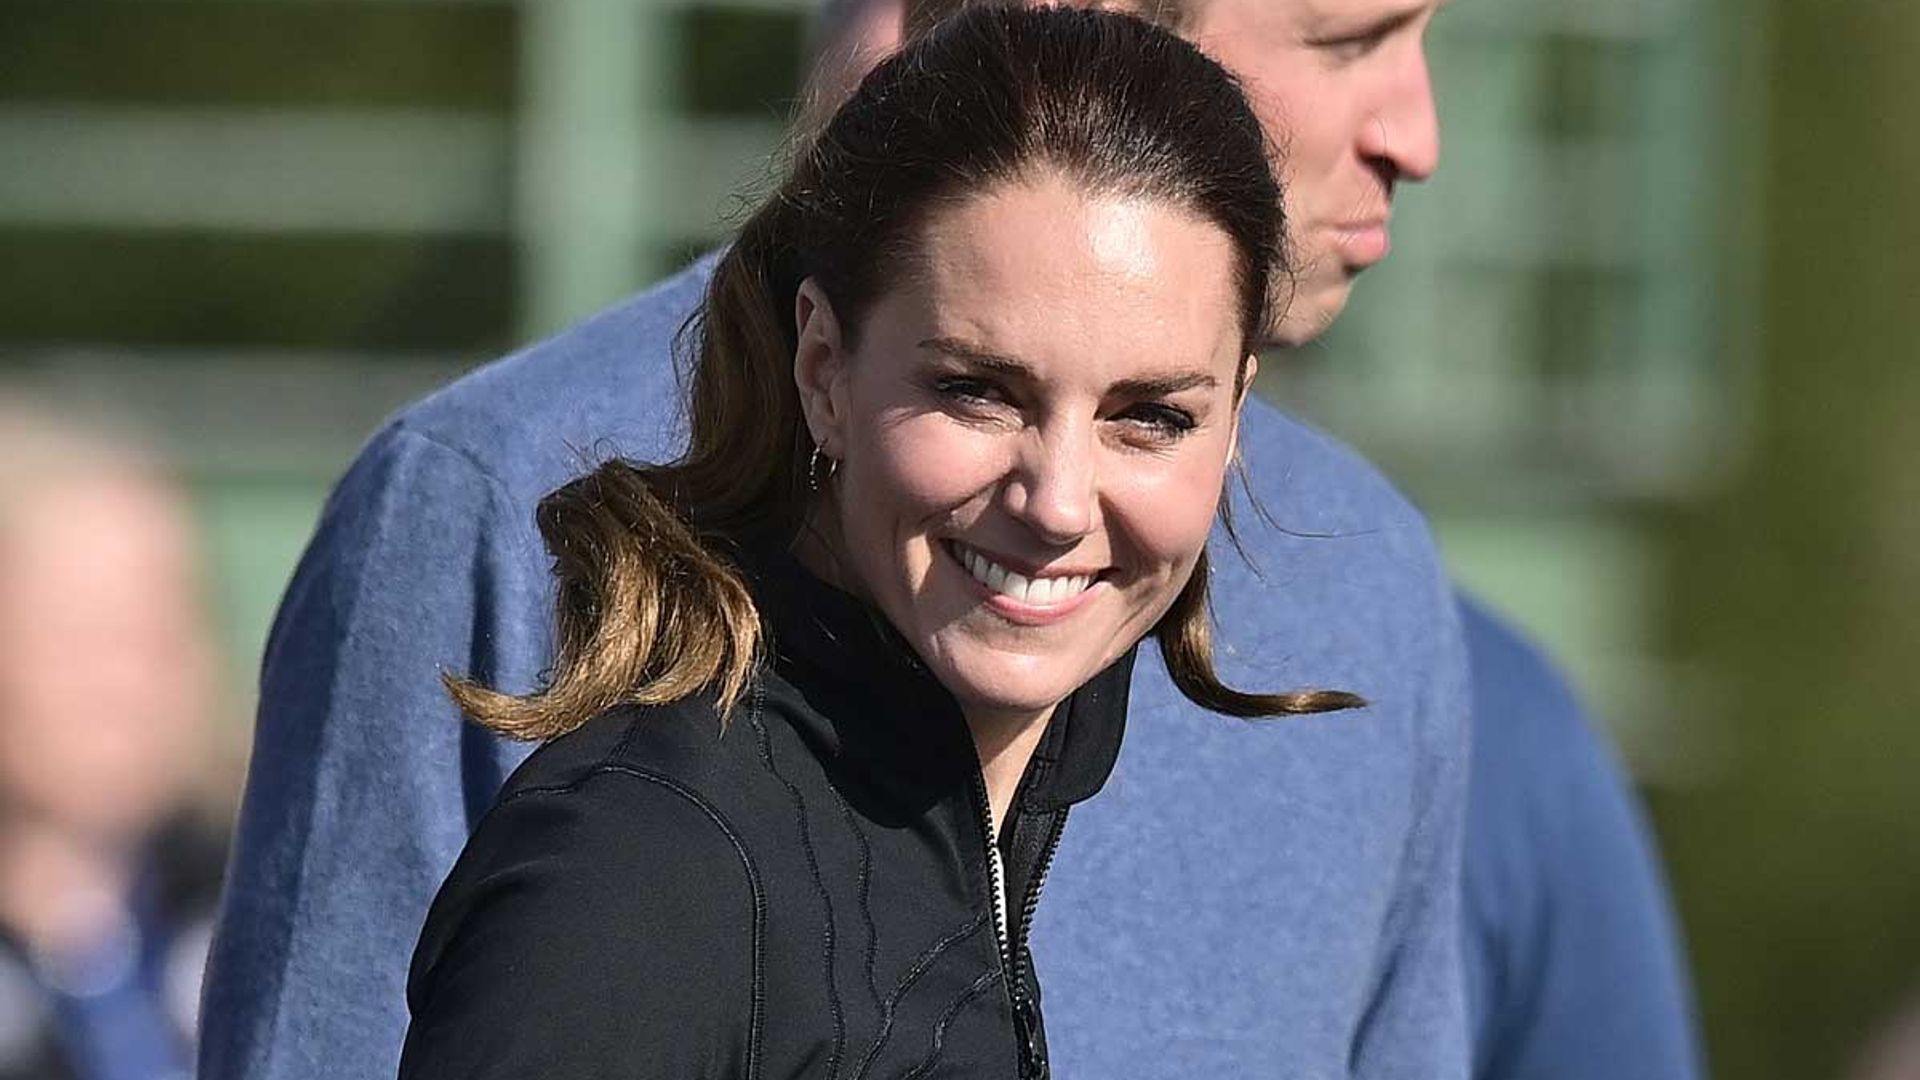 Sporty Kate Middleton changes into sleek activewear to play rugby in Northern Ireland